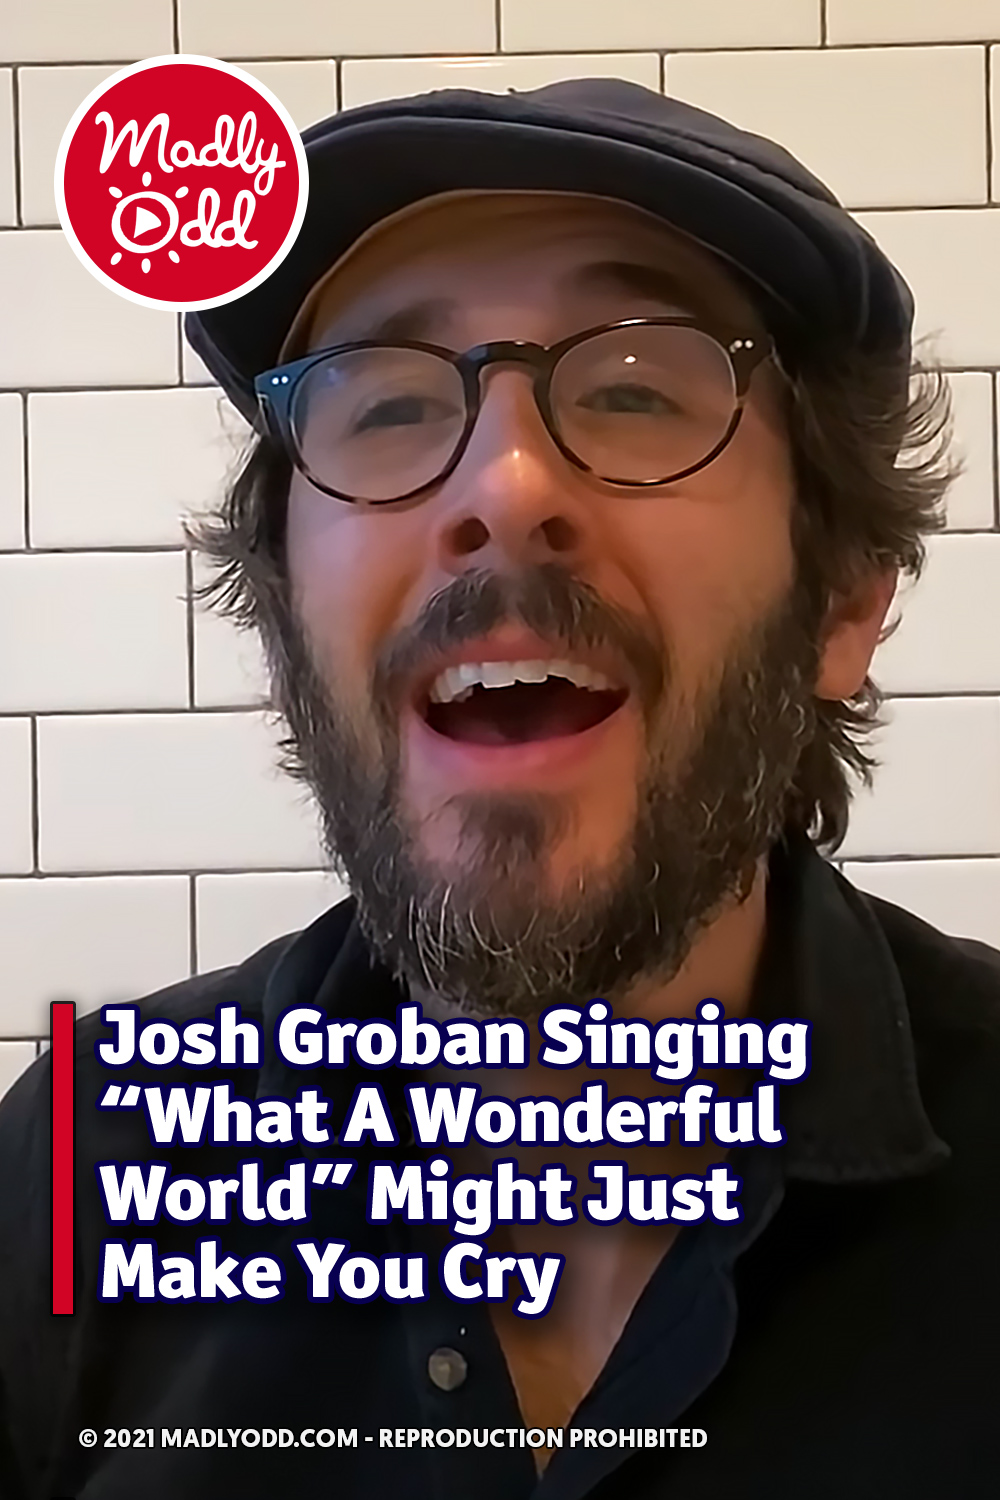 Josh Groban Singing “What A Wonderful World” Might Just Make You Cry